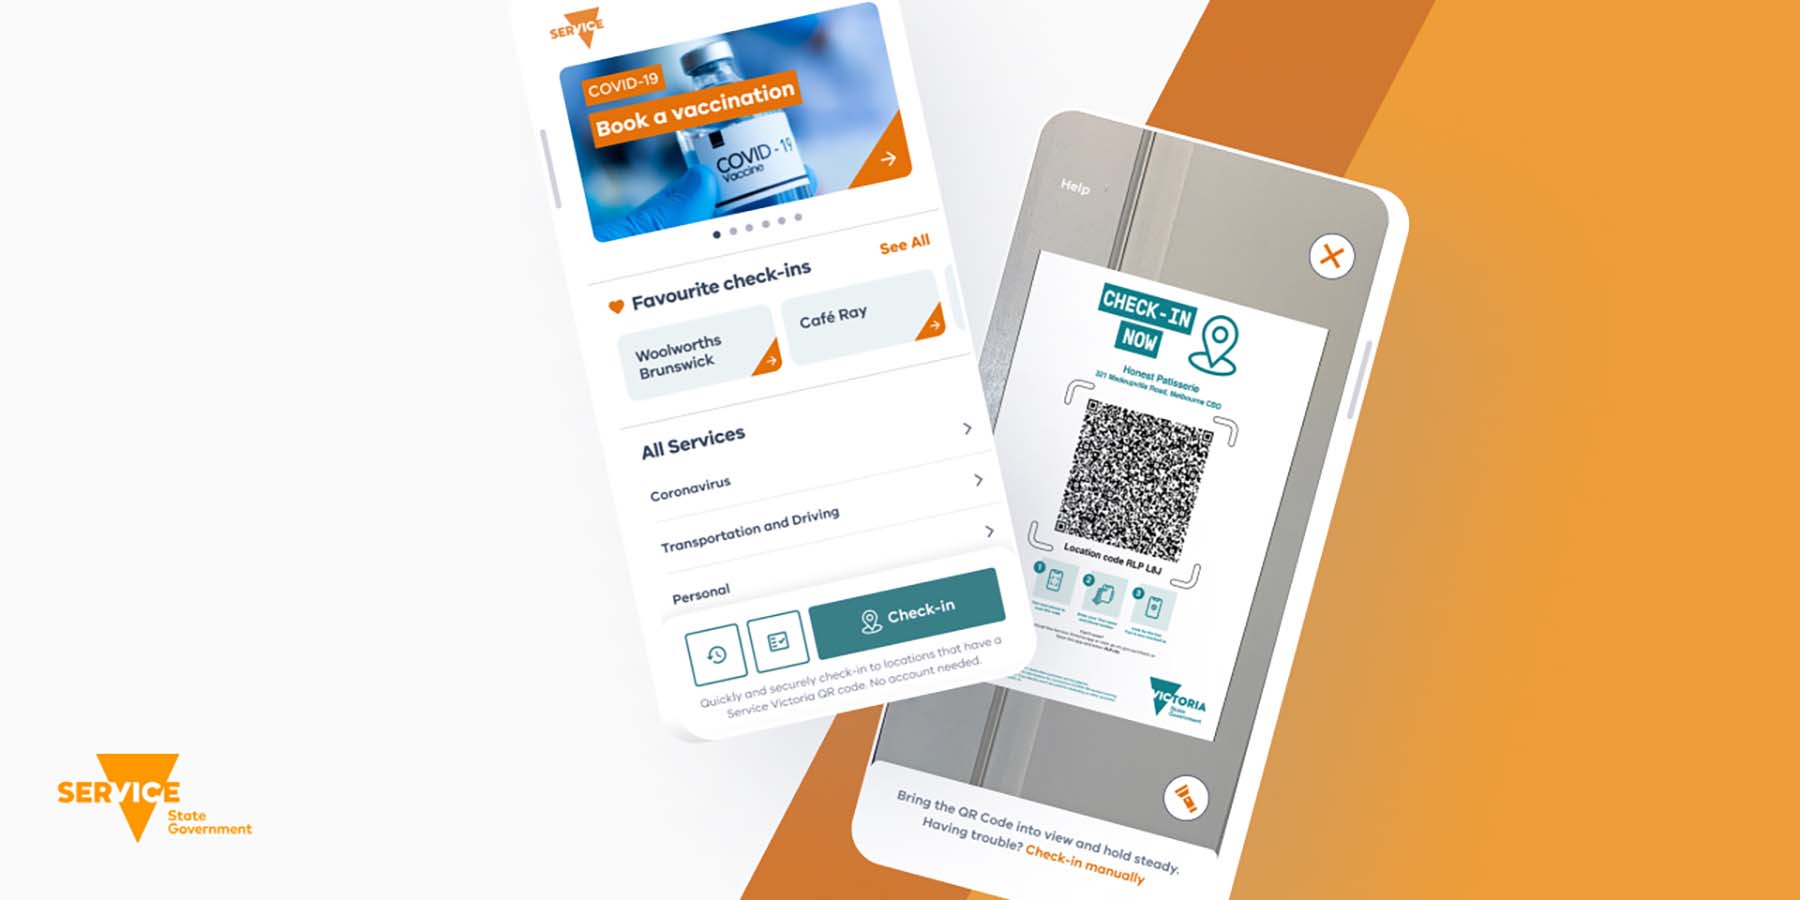 Two mobile phones on a white and orange background displaying screens from the Service Victoria Mobile App Check-In Function.